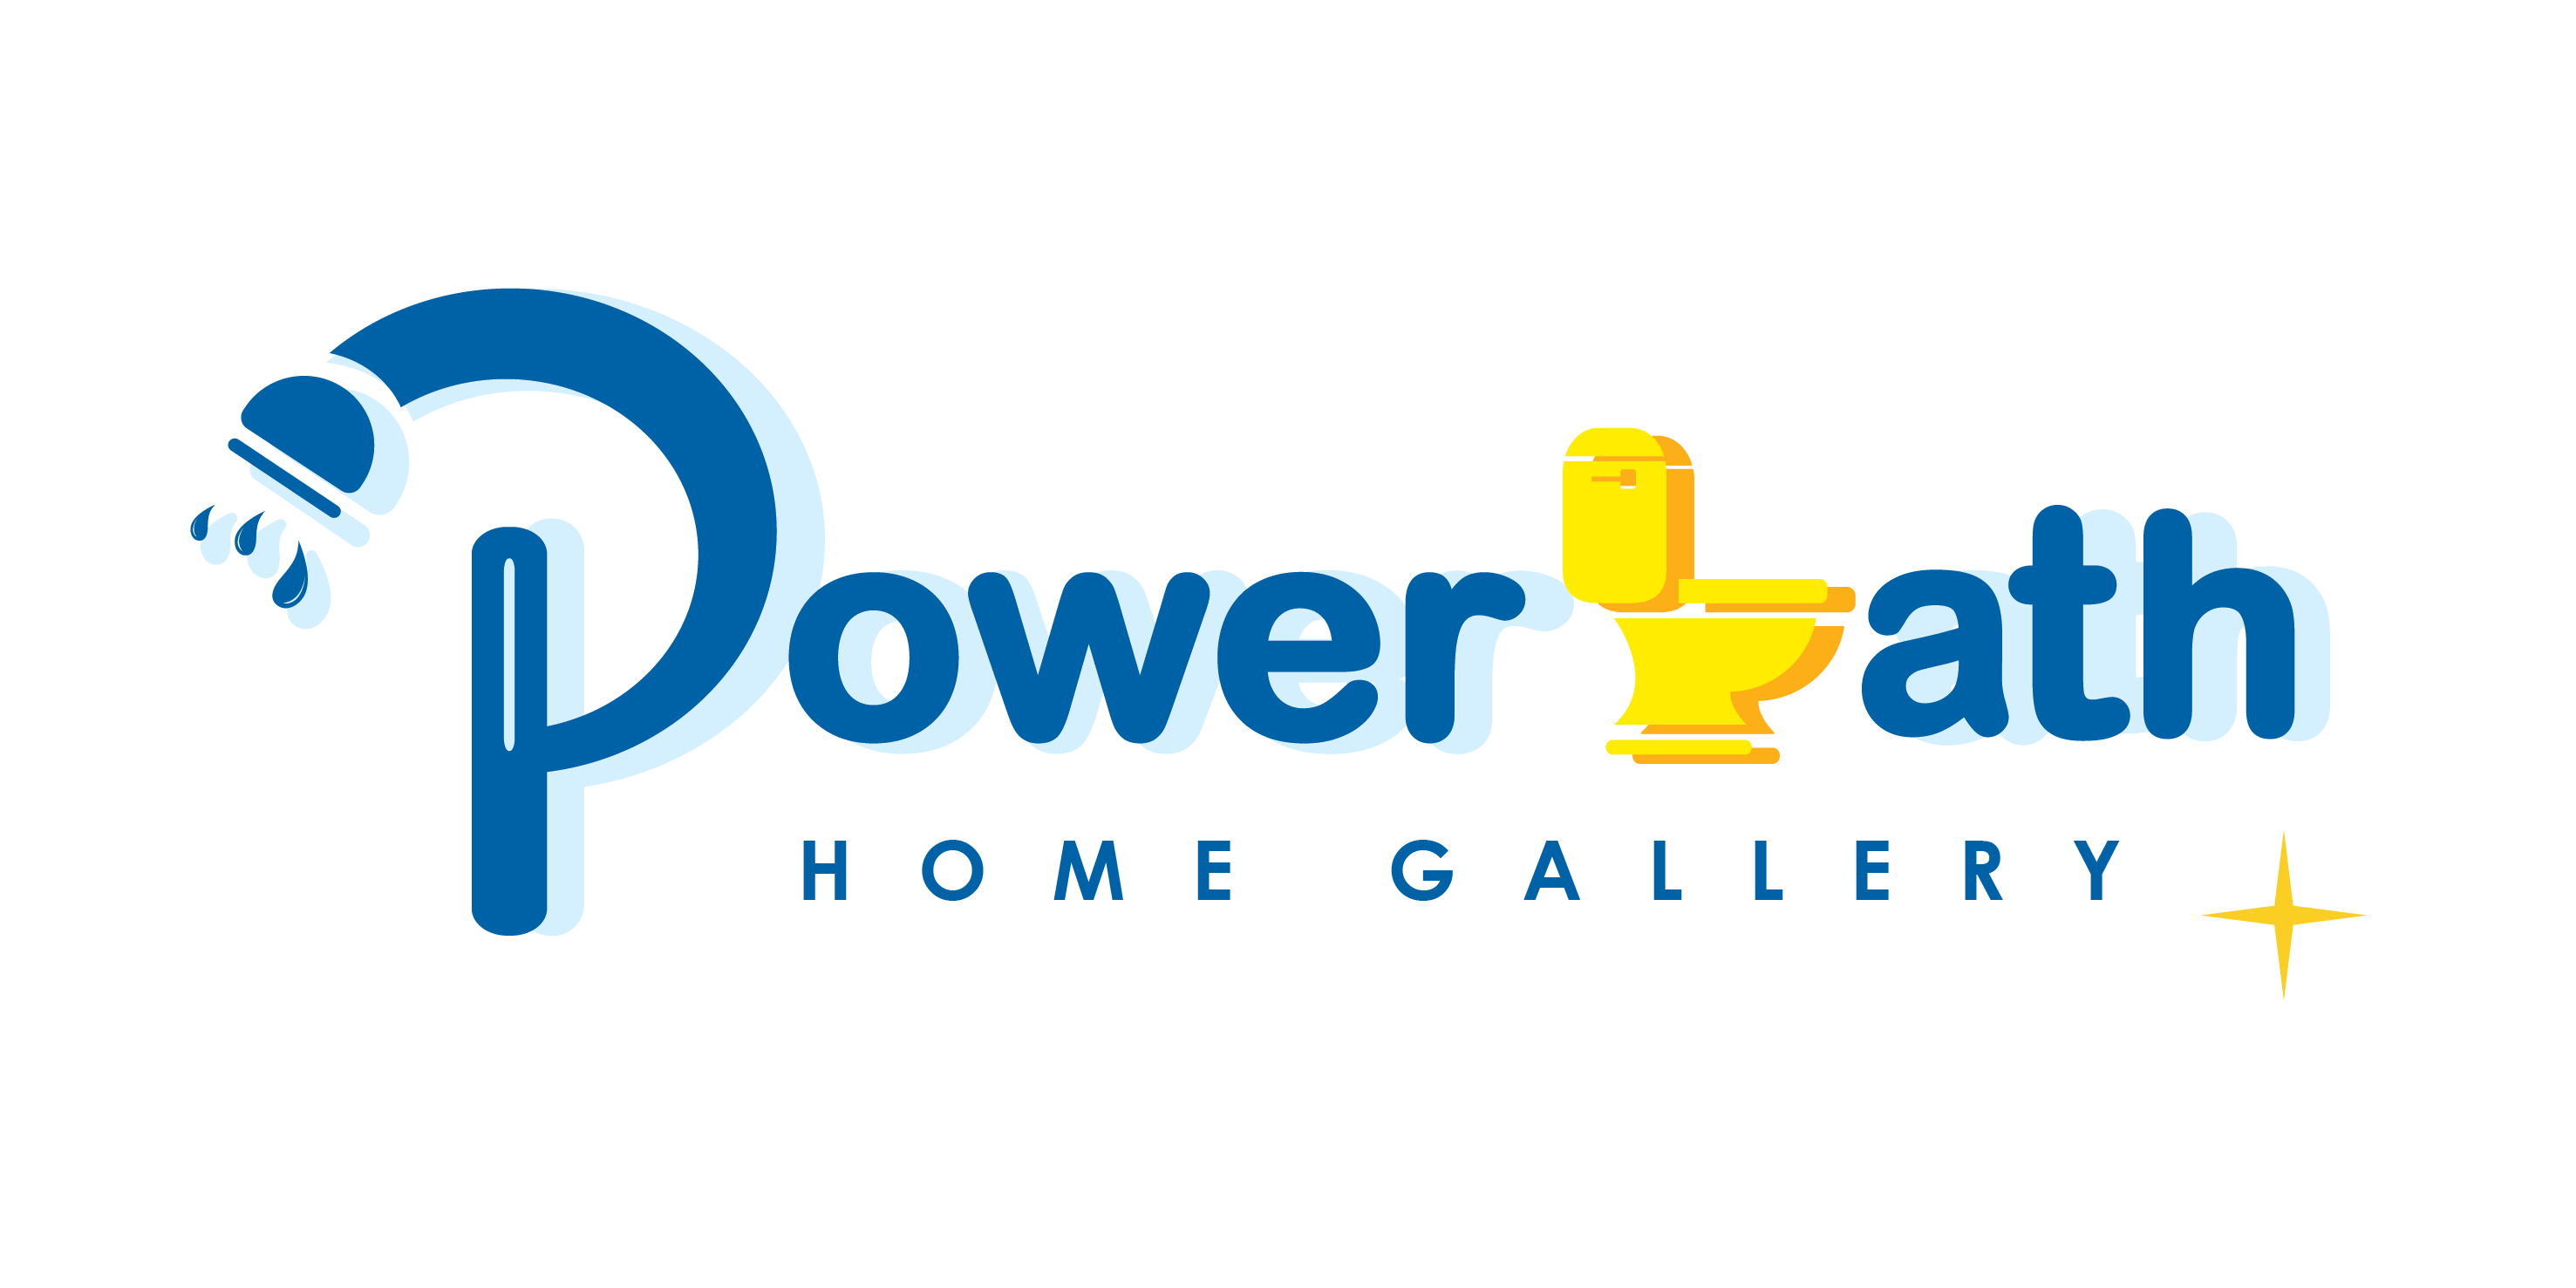 Power Bath Home Gallery | Your 1st Choice for Home